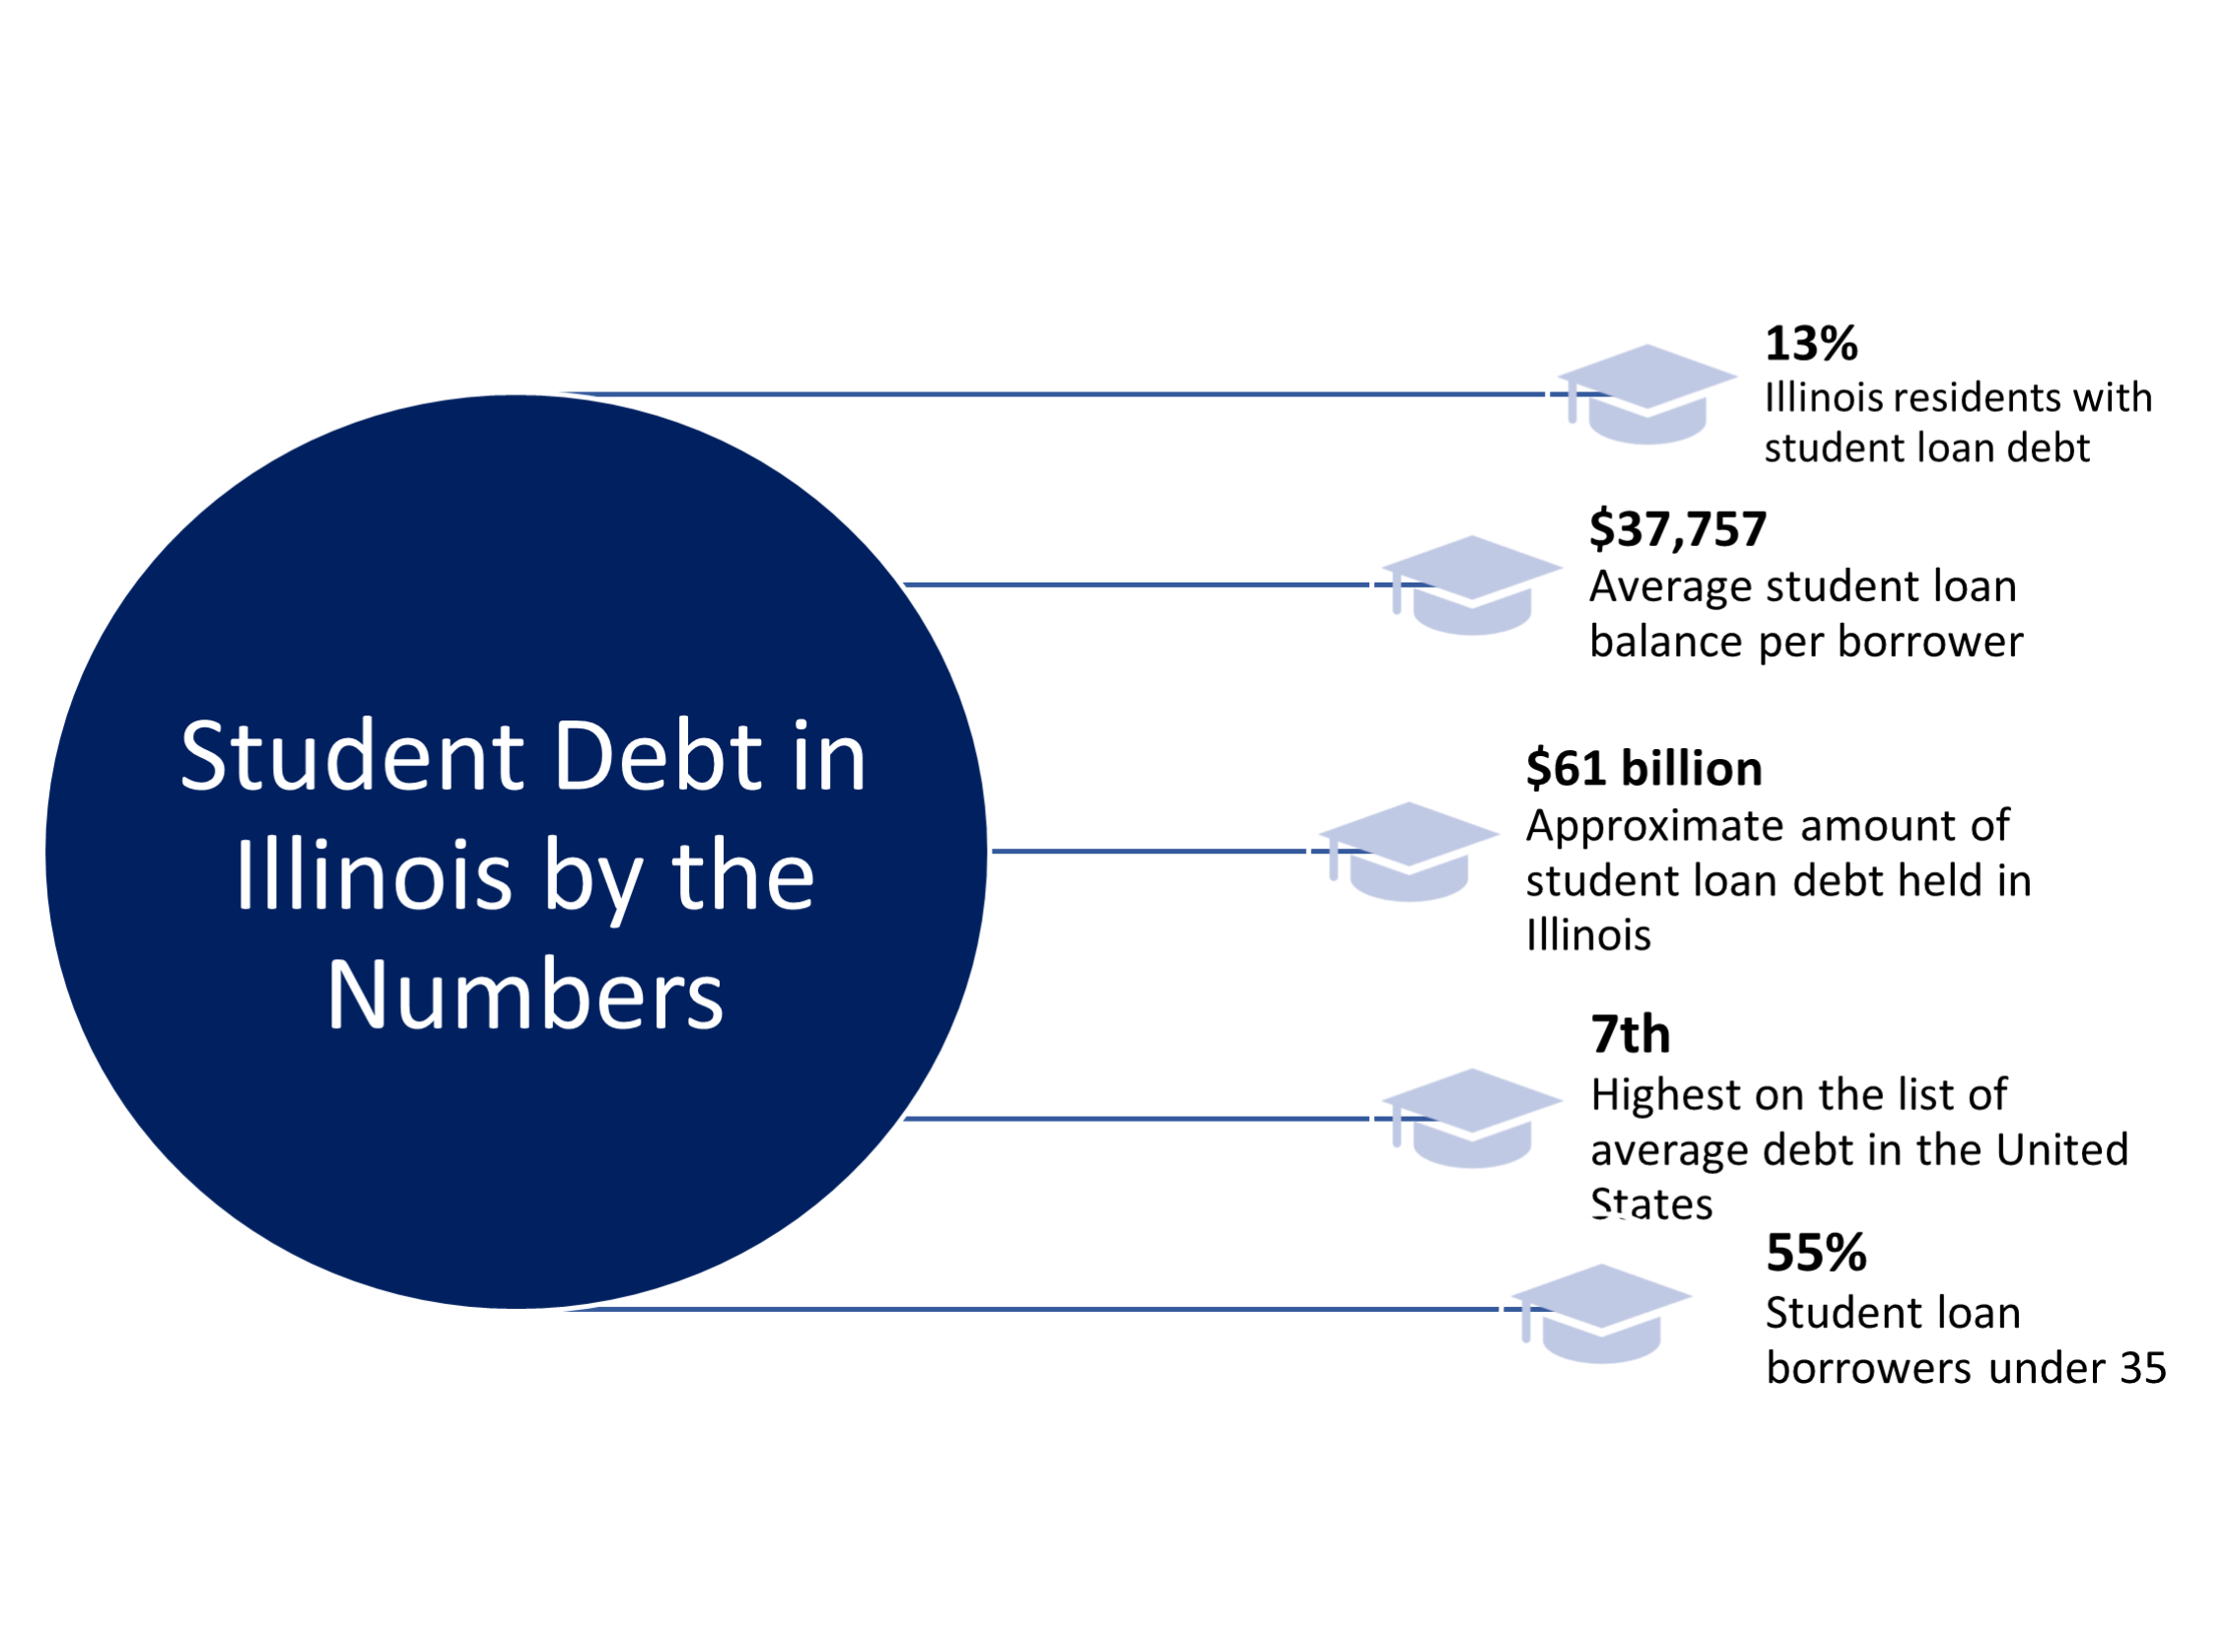 Student Debt in Illinois by the Numbers